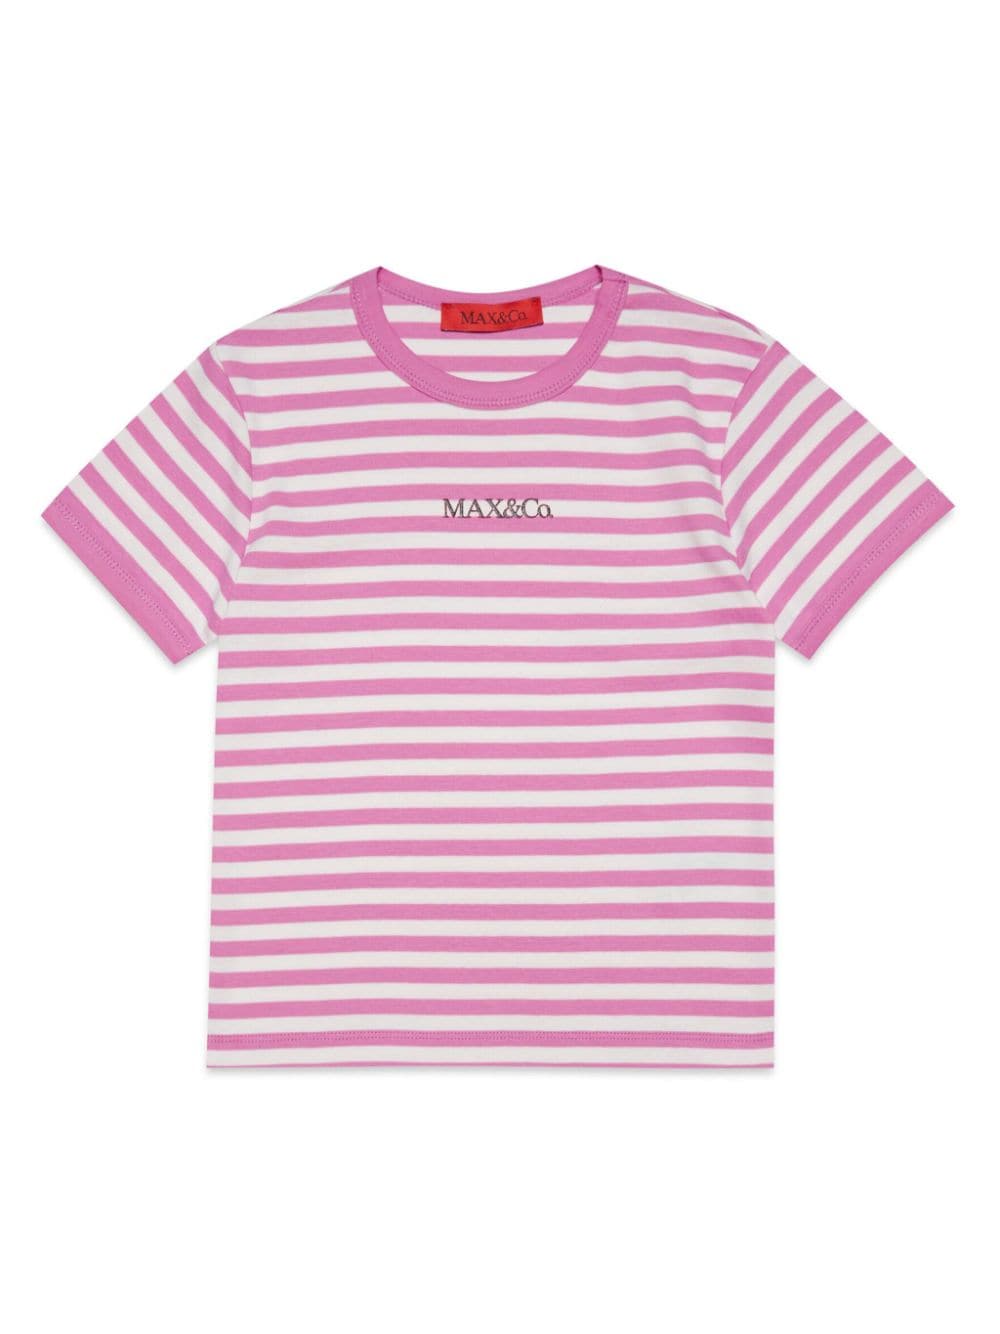 White and pink t-shirt for girls with logo